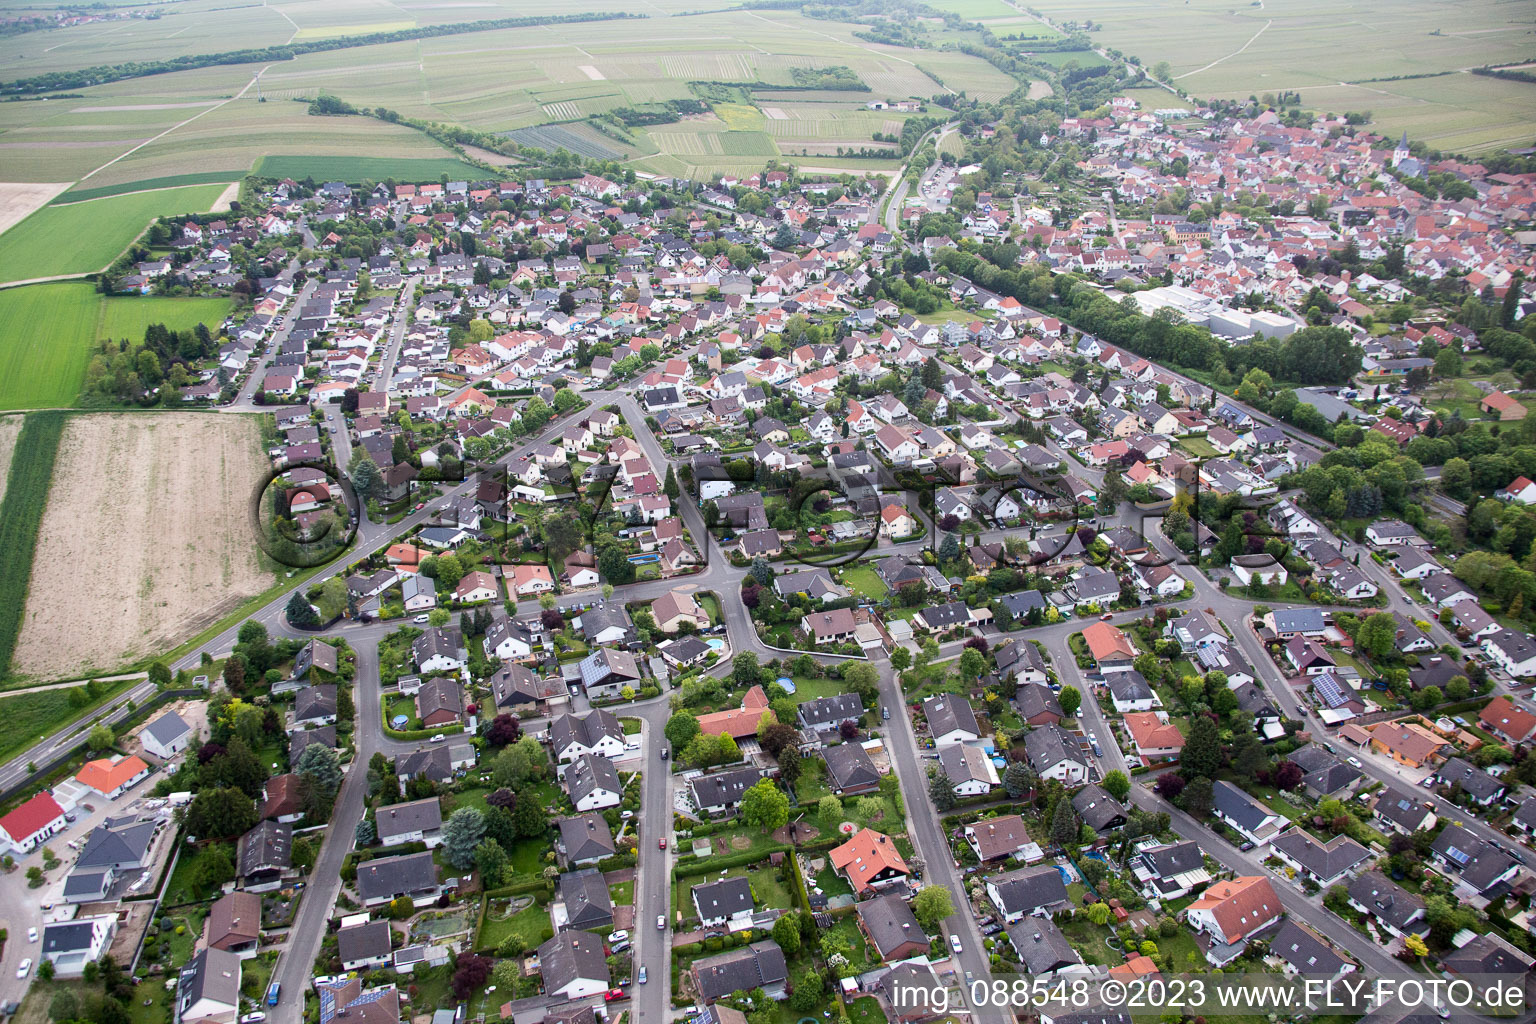 Bird's eye view of Westhofen in the state Rhineland-Palatinate, Germany